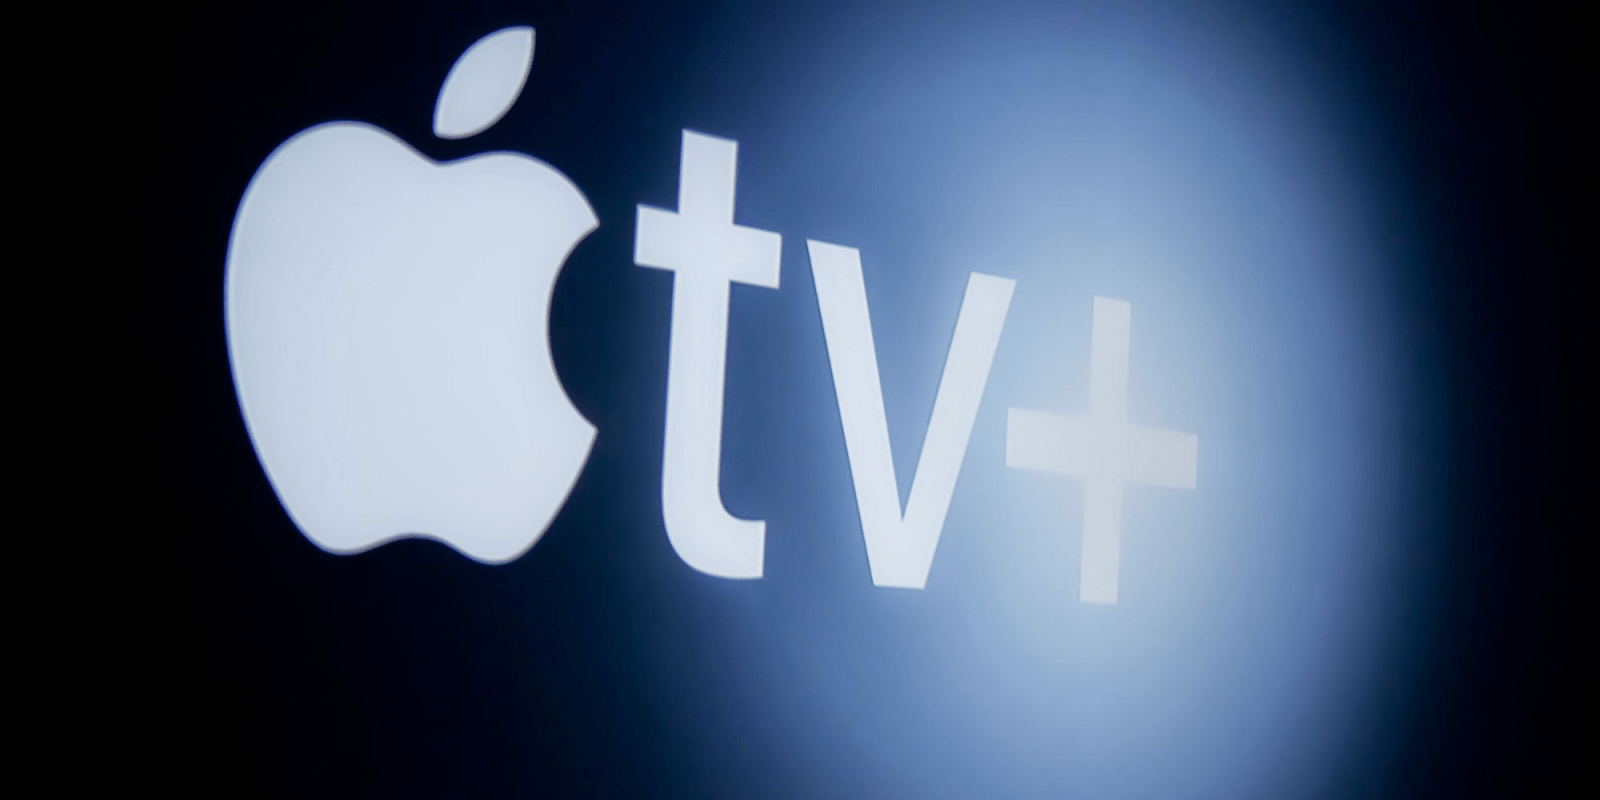 Apple TV+ reaches 6% market share in US while Netflix loses subscribers